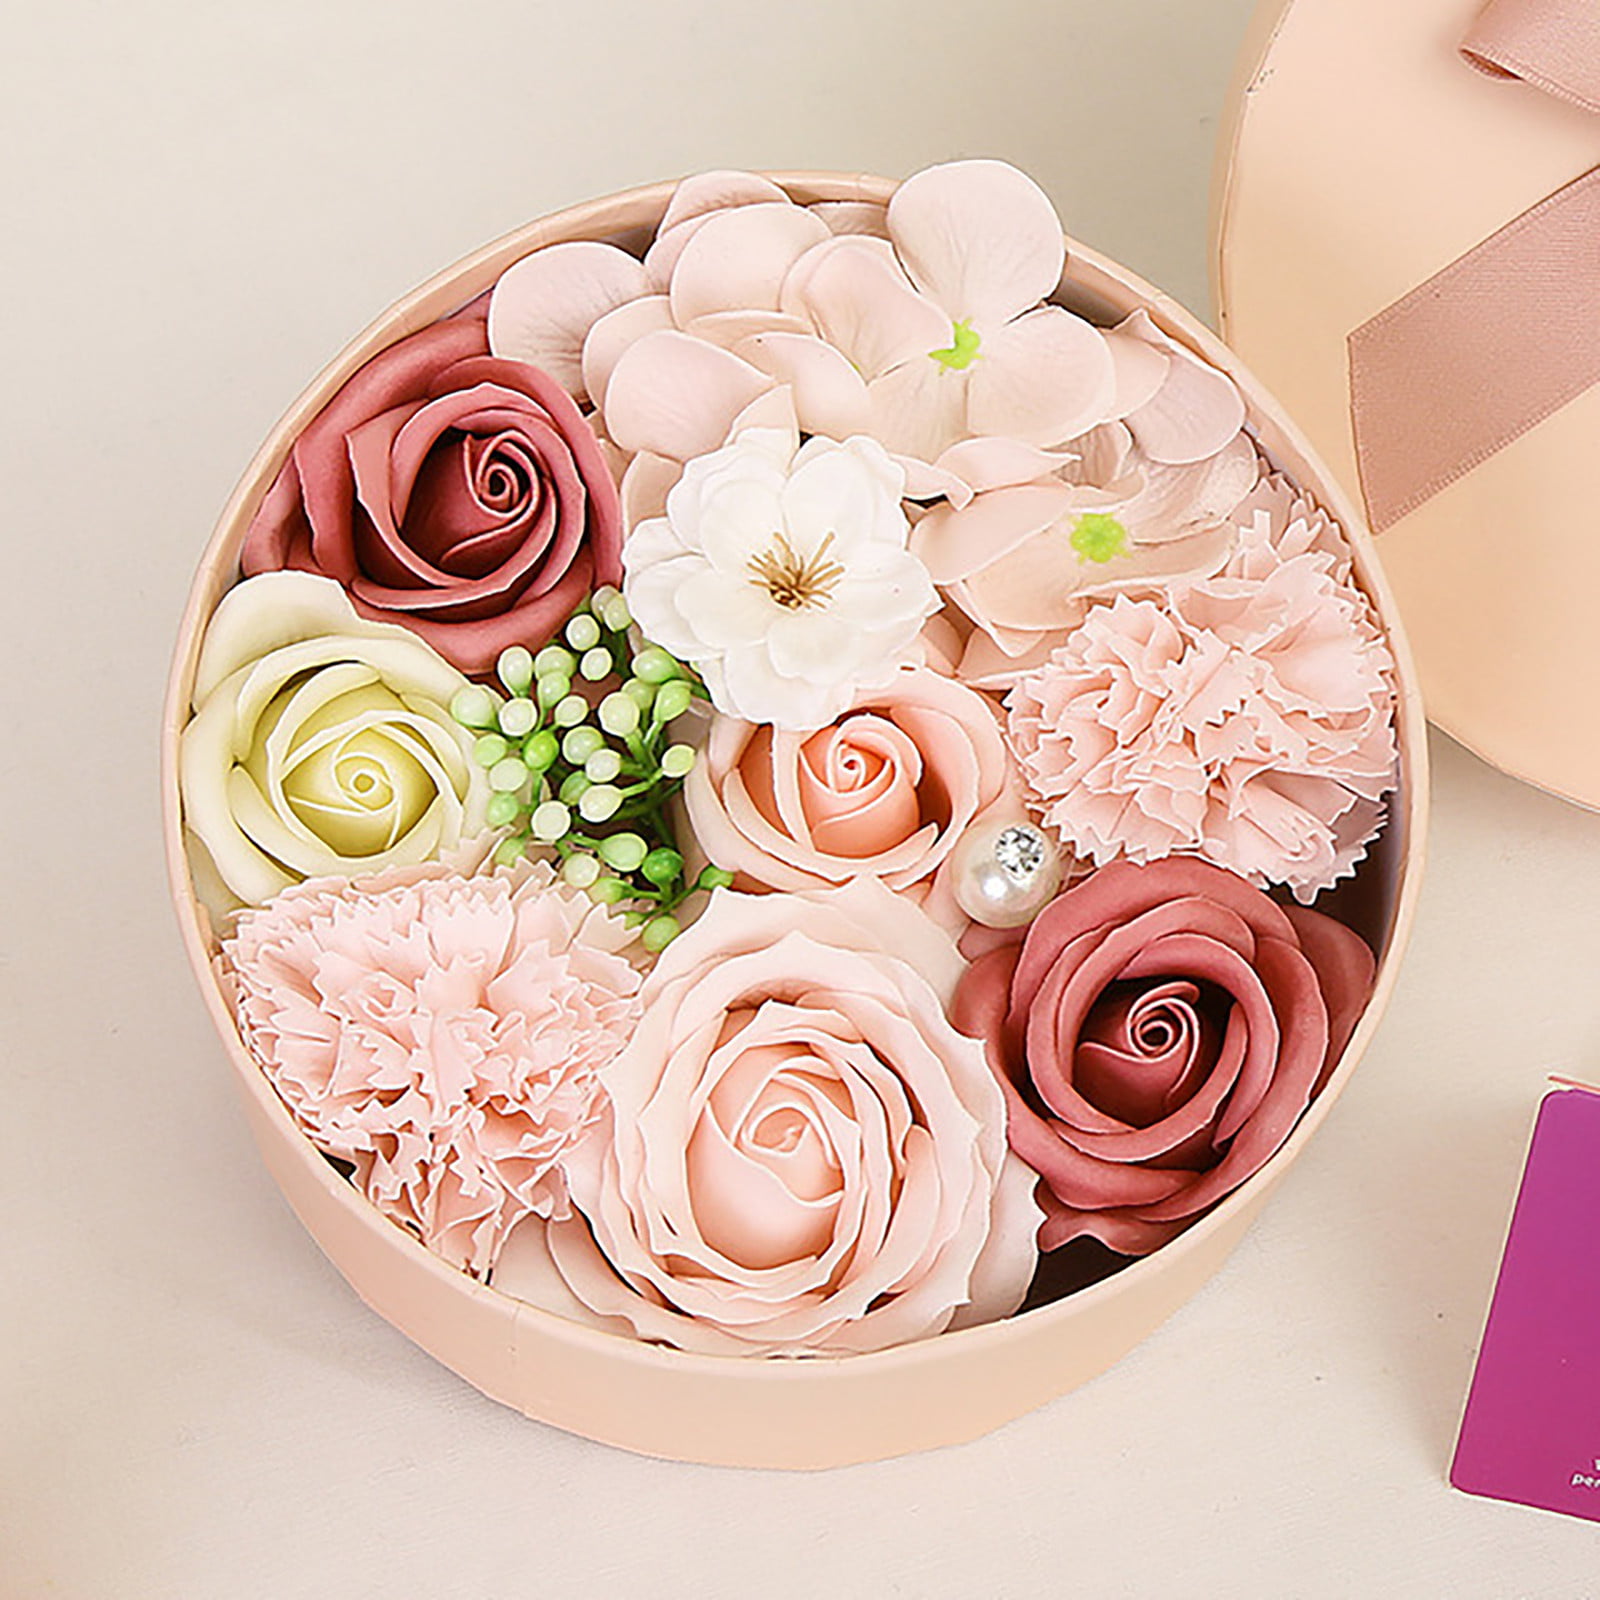 Dainzusyful Gifts For Mom Forever Rose Mother's Day DIY Soap Flower Gift  Rose Box Bouquet Wedding Home Festival Gift Artificial Flowers Living Room